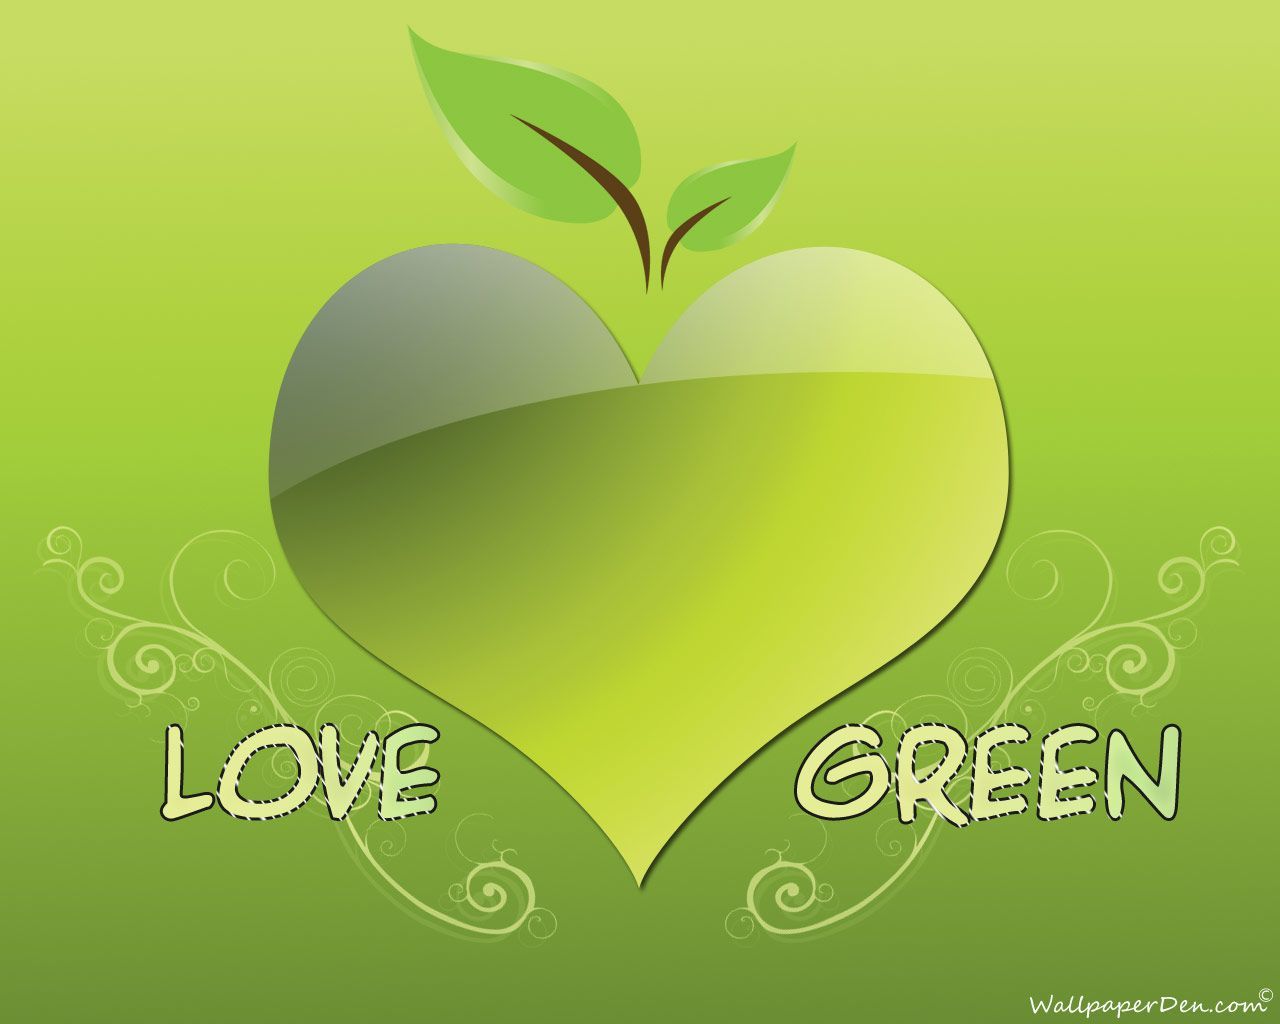 Green. Love Green, free beautiful wallpaper download for your desktop or. Green theme, Green wallpaper, Shades of green